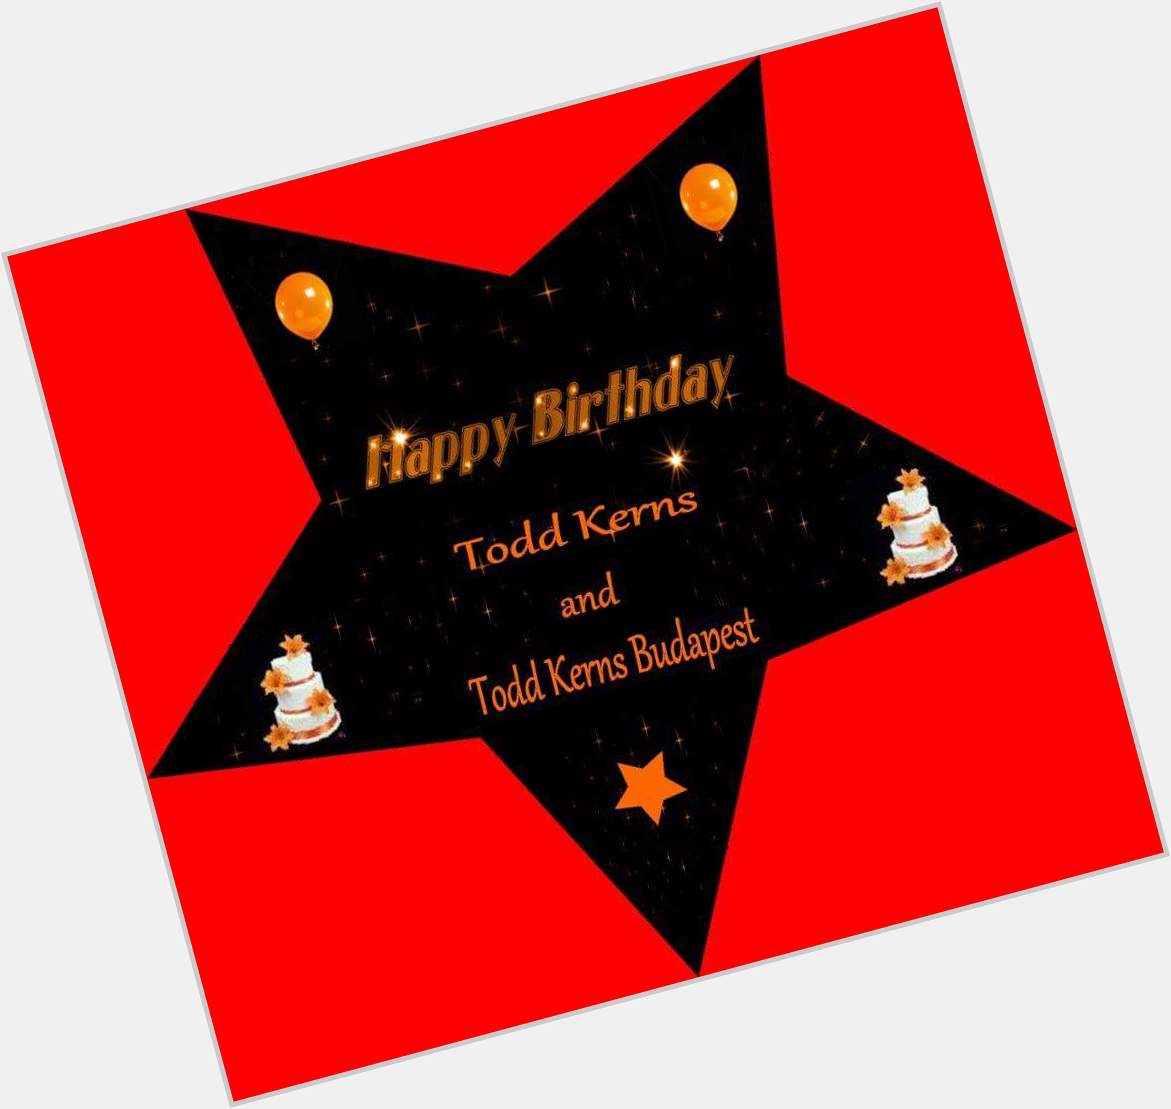 Happy Birthday and Todd Kerns Budapest Page! :) My site got 3 months old today! :) 